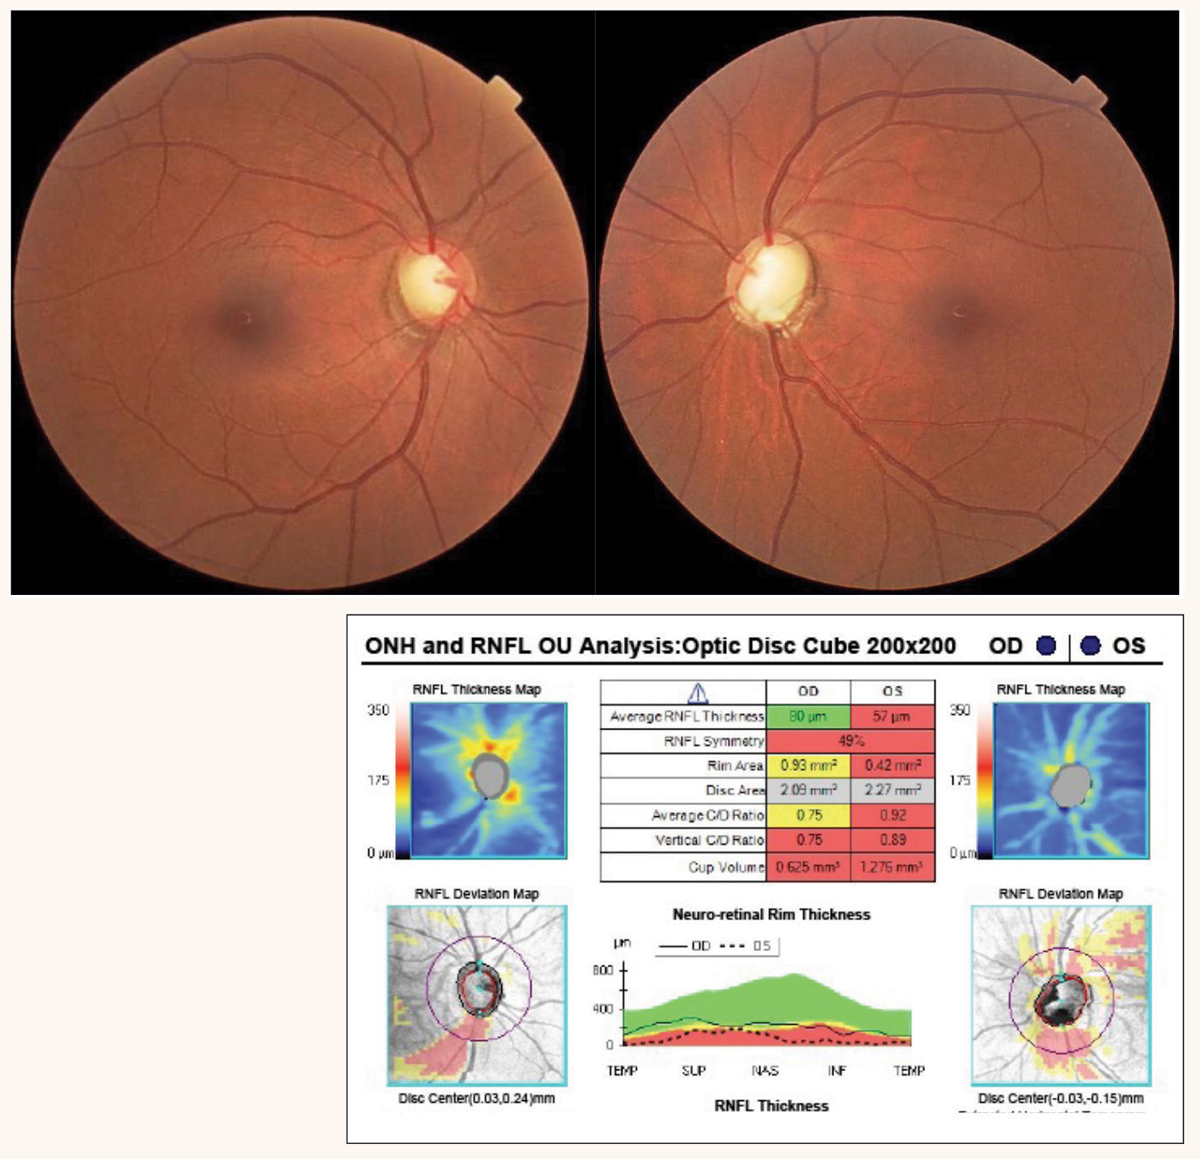 Fig. 1. Tilted discs with RNFL dropout OD and congenital optic pit OS. OCT reveals RNFL defects in the interior quadrant consistent with disc tilt. 